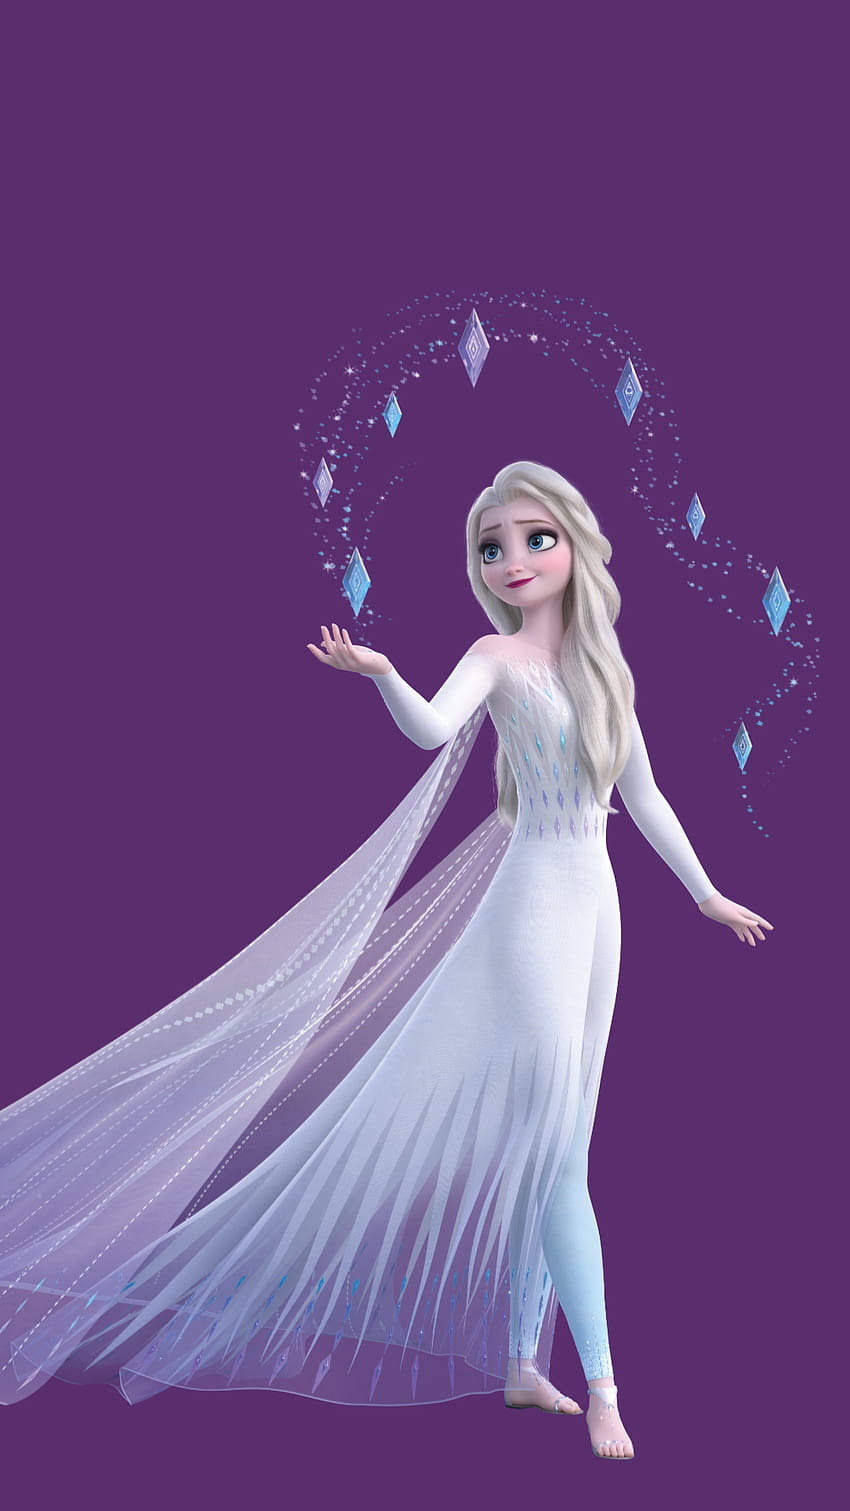 15 new Frozen 2 with Elsa in white dress and her hair down, frozen ...